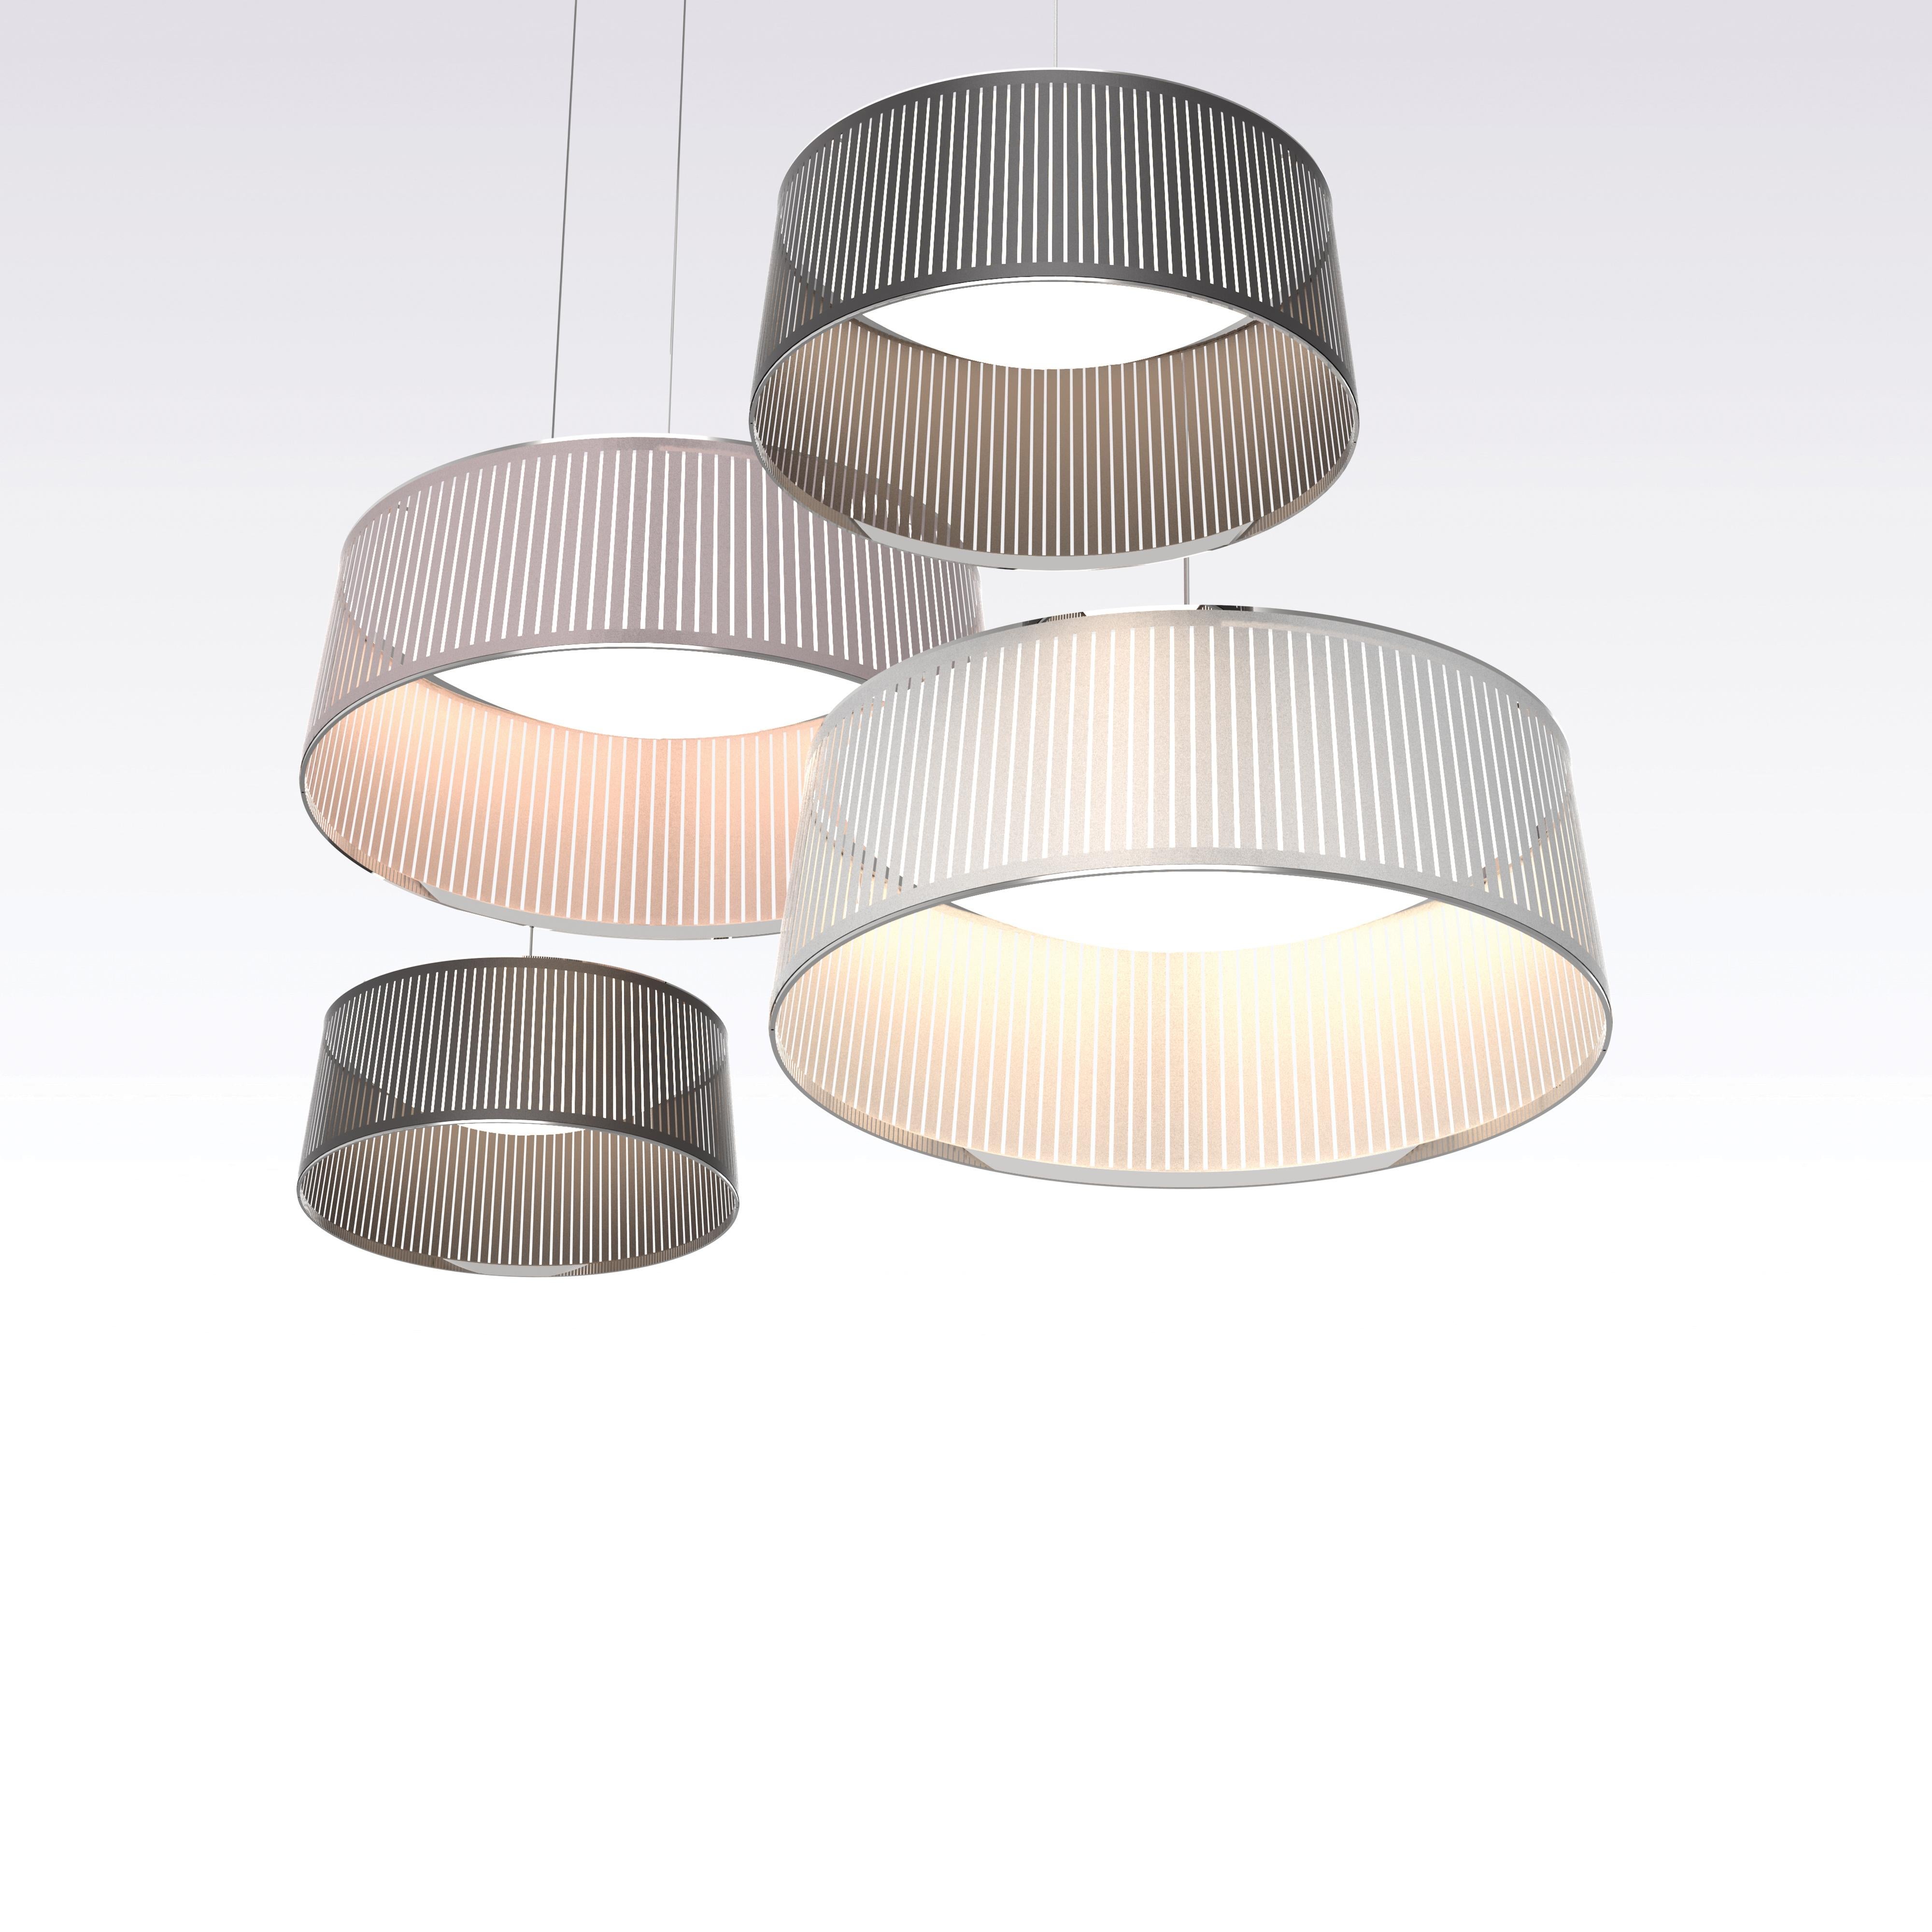 American Solis Drum 36 Pendant Light in White by Pablo Designs For Sale